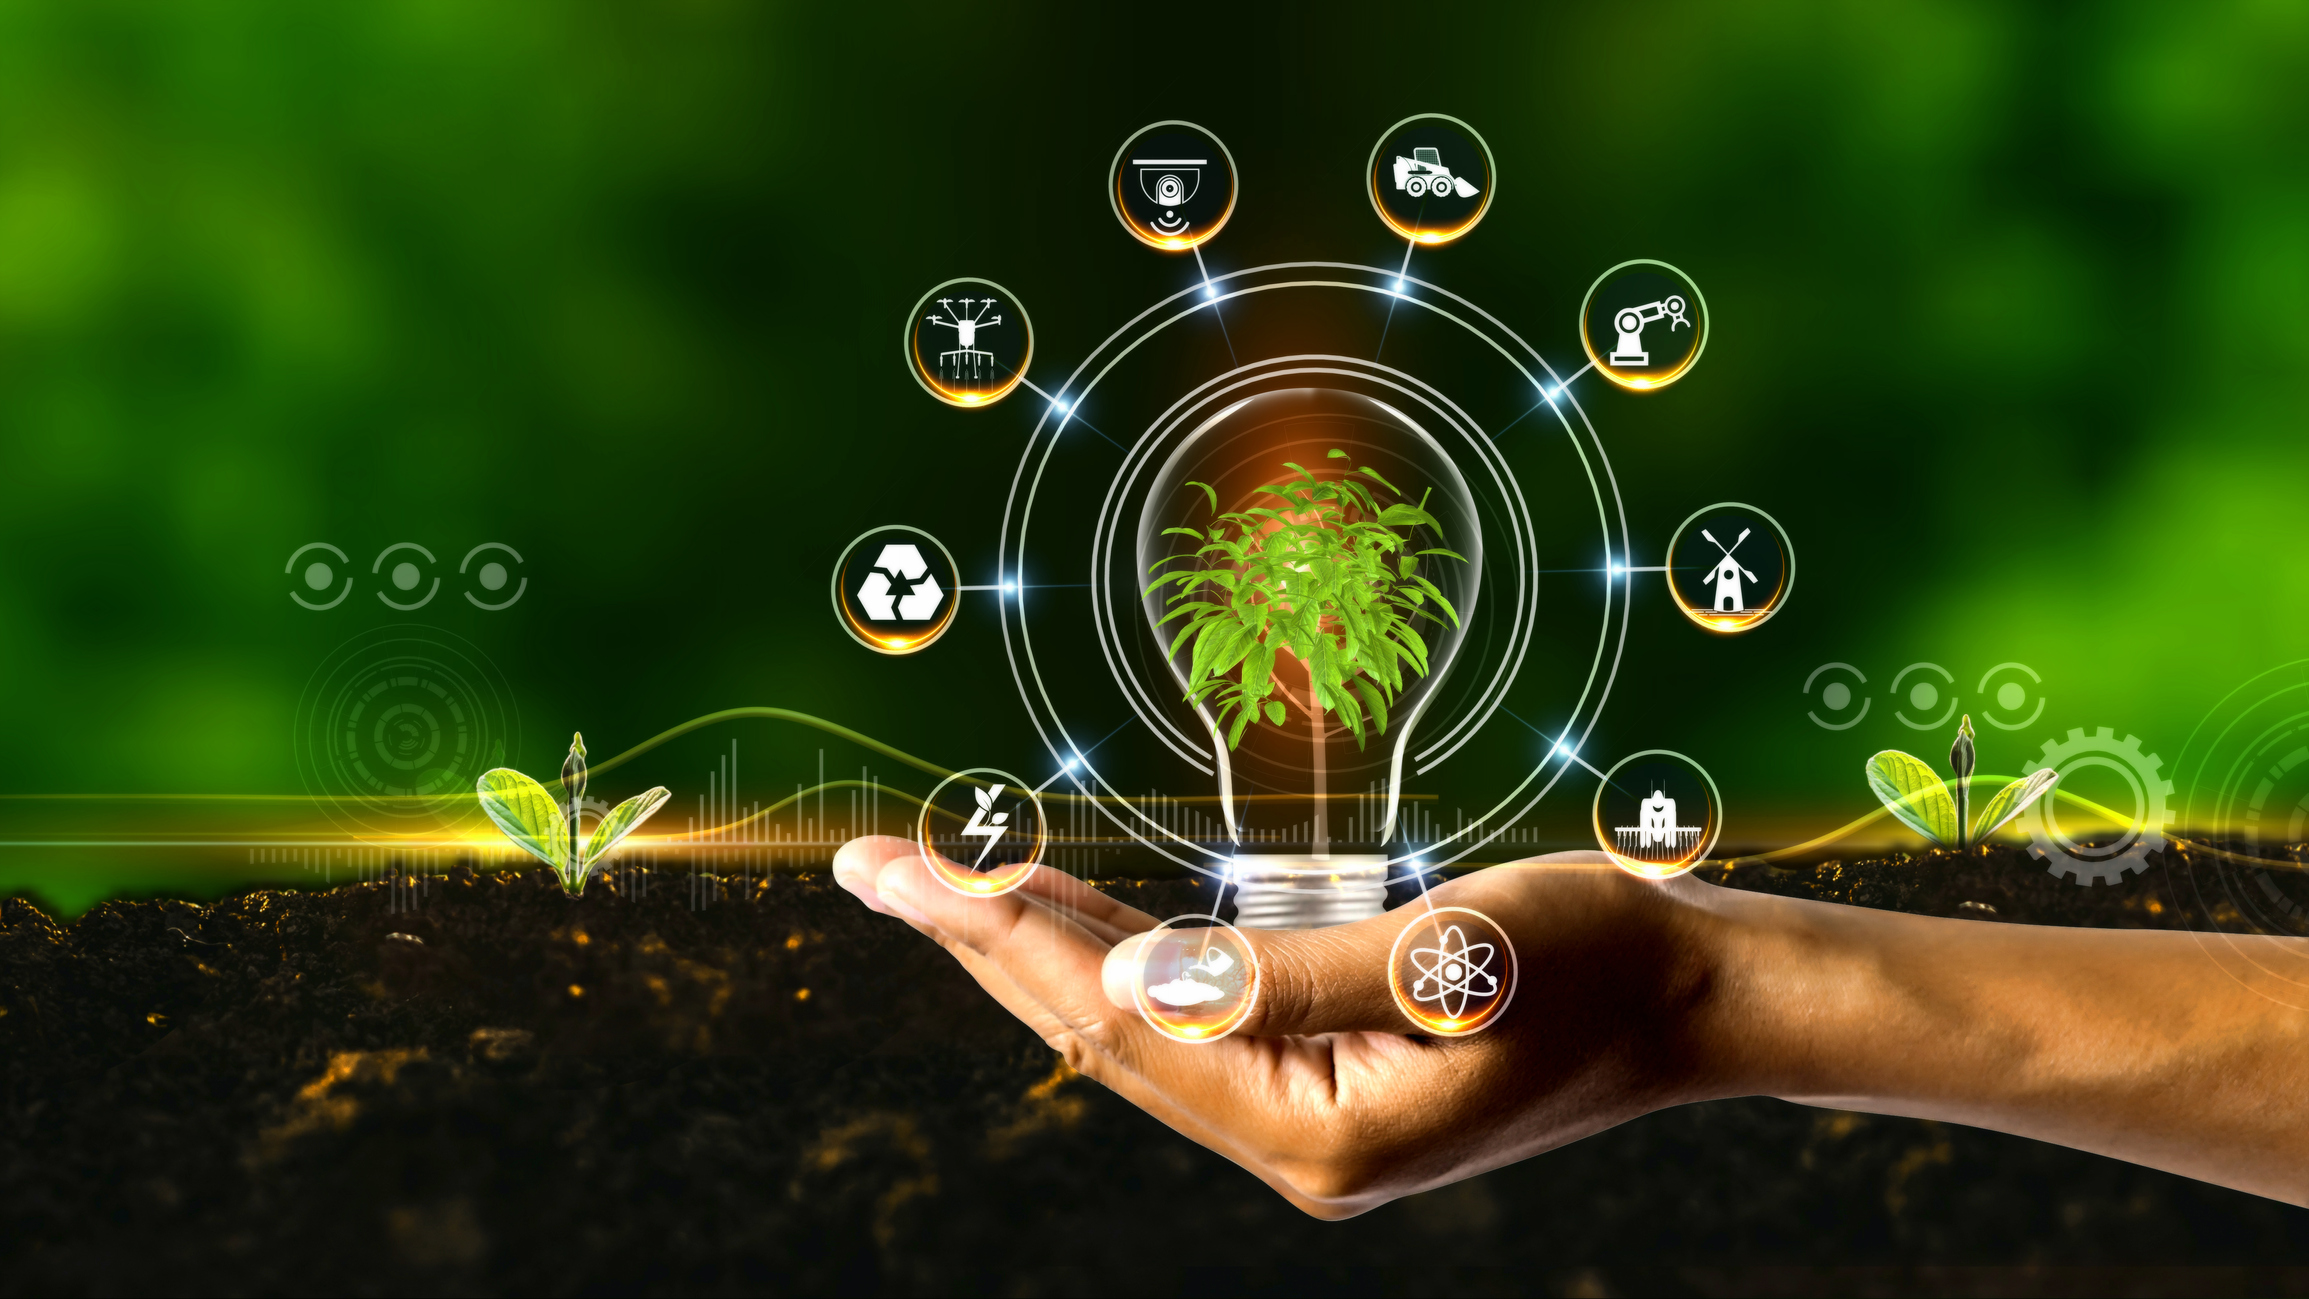 A green image representing smart farming using a hand, farm innovations and a light bulb